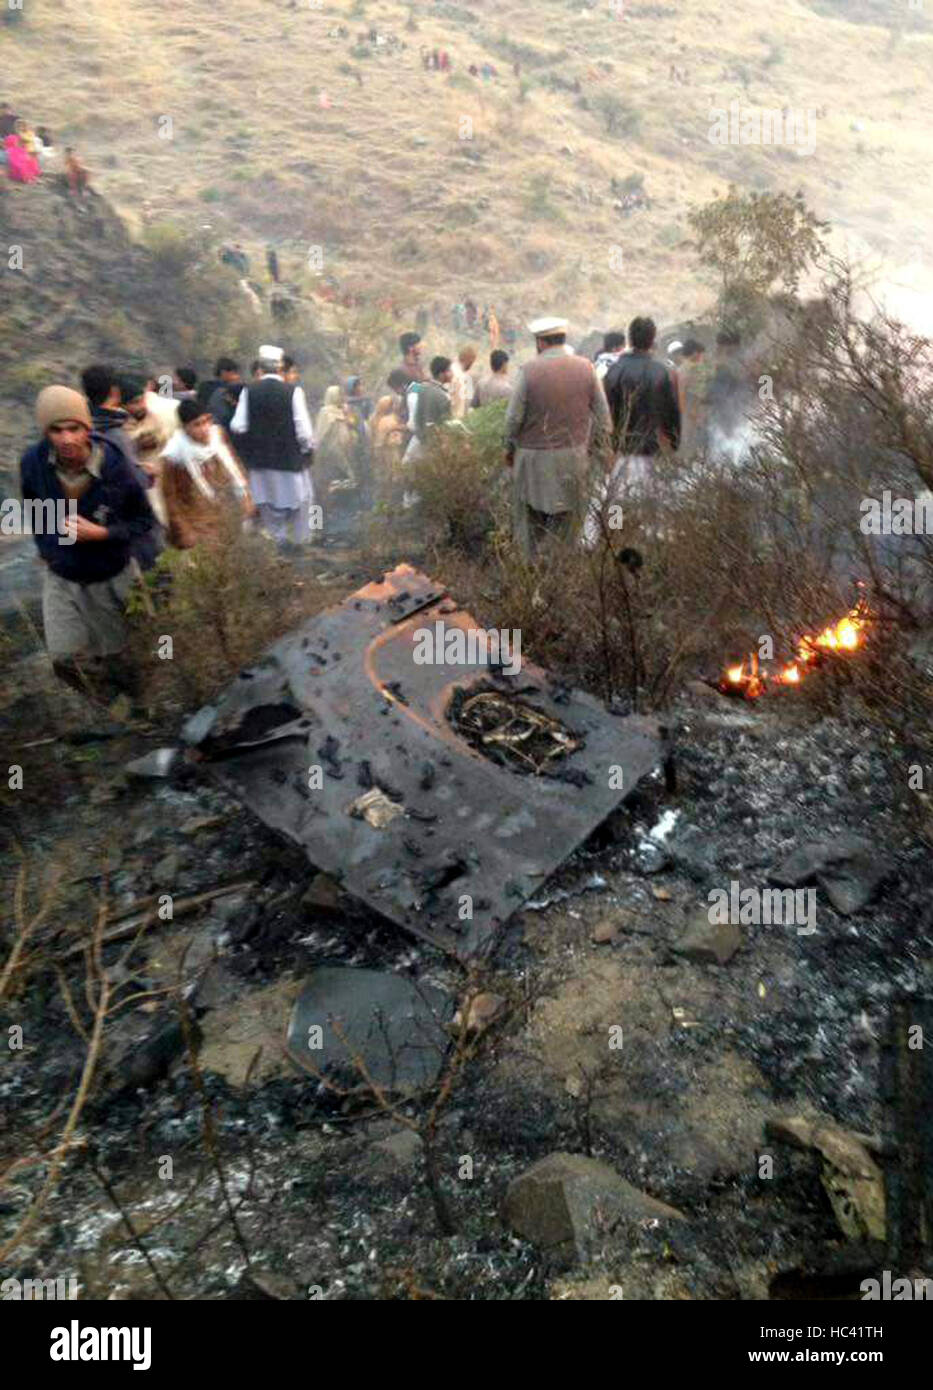 Havelian, Pakistan. 7th December, 2016. locals gathering at a plane crash site in Pakistan's Havelian. Rescue work is underway after a passenger plane of Pakistan International Airlines (PIA) with 47 people on board crashed in the country's northern Havelian area on Wednesday, officials said. (Xinhua/Stringer) (sxk) Credit:  Xinhua/Alamy Live News Stock Photo